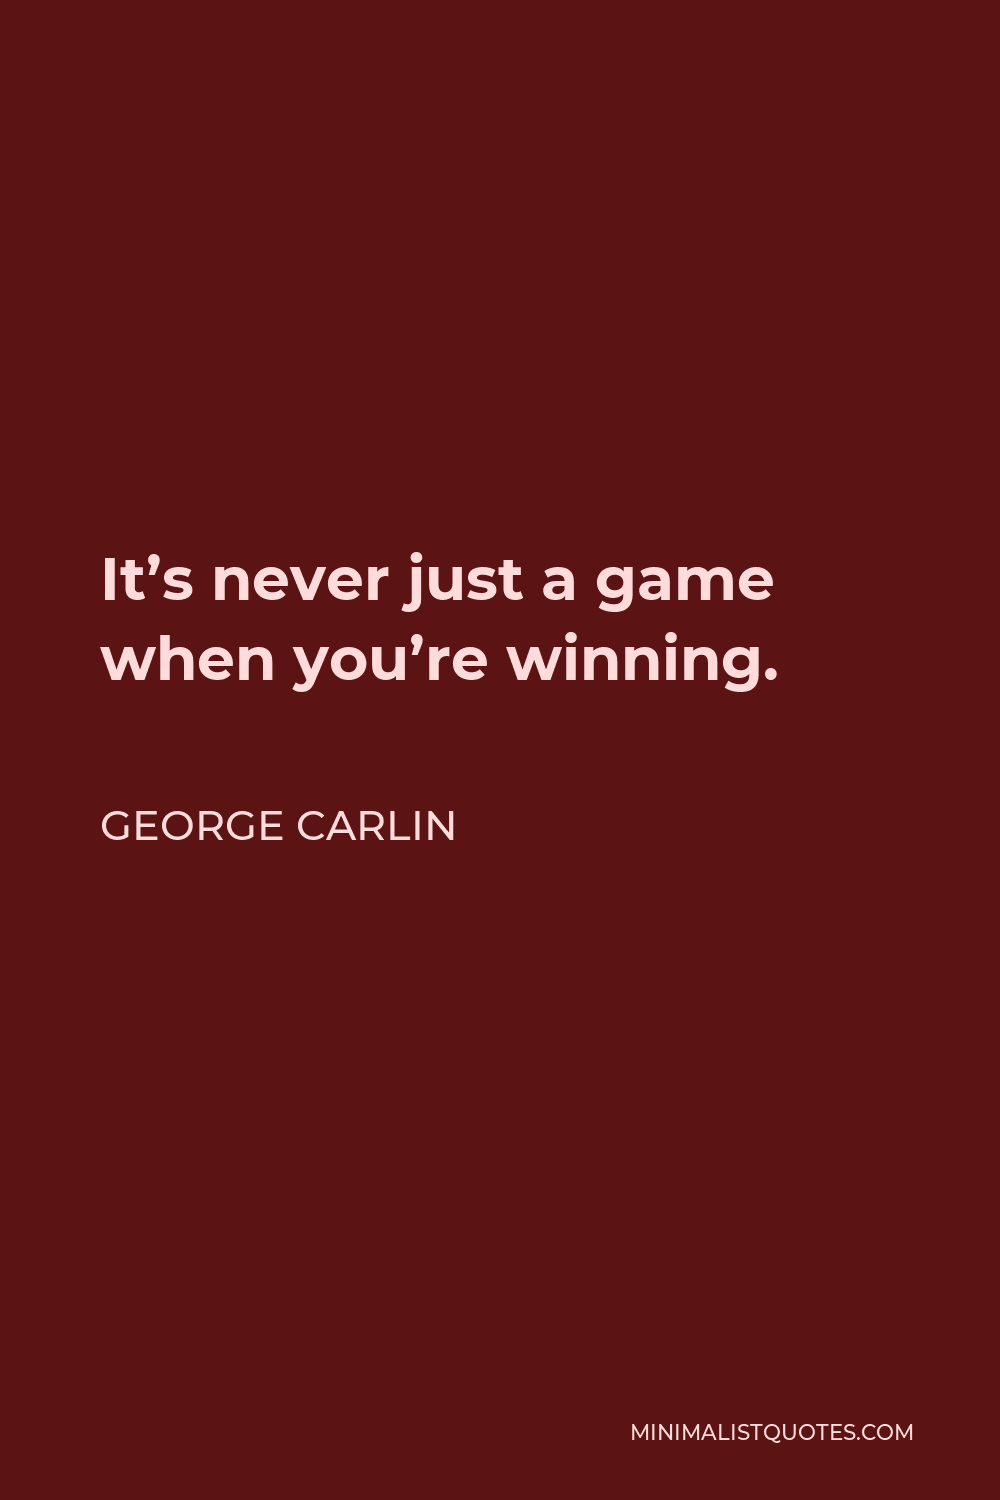 George Carlin Quote - It’s never just a game when you’re winning.